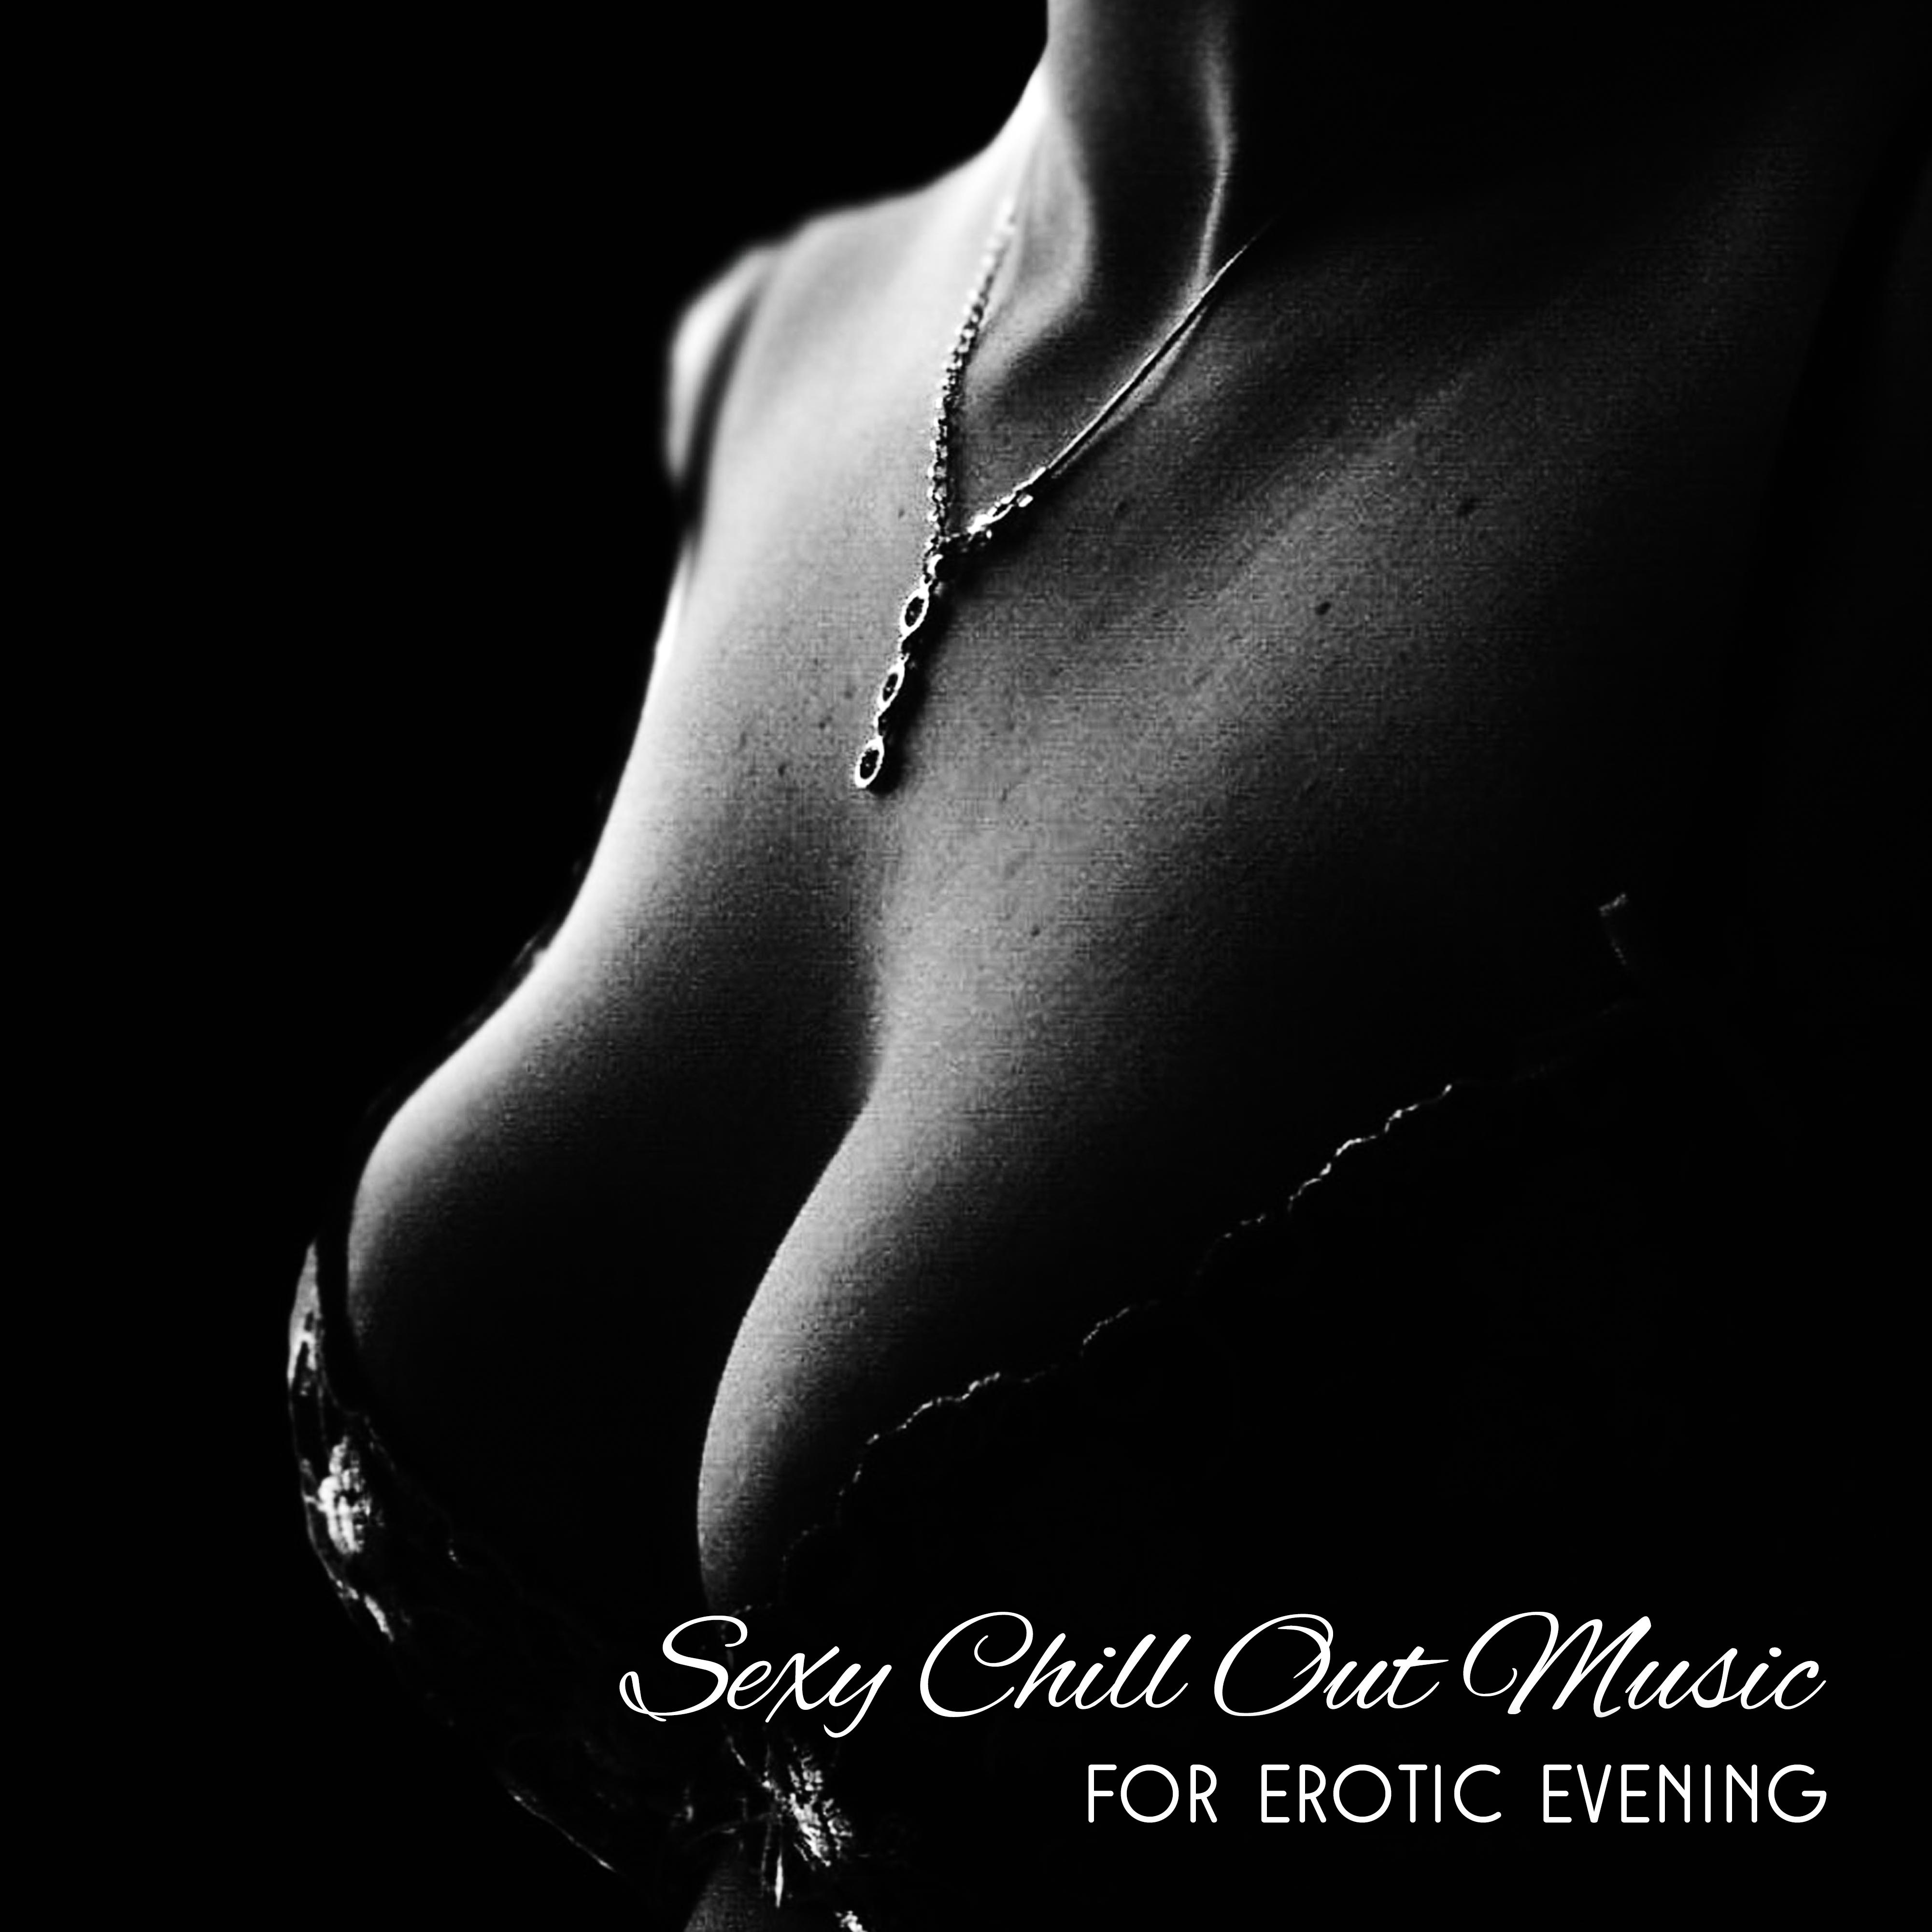 **** Chill Out Music for Erotic Evening – Chill Out Beats for Lovers, **** Dance, Erotic Sounds for Night